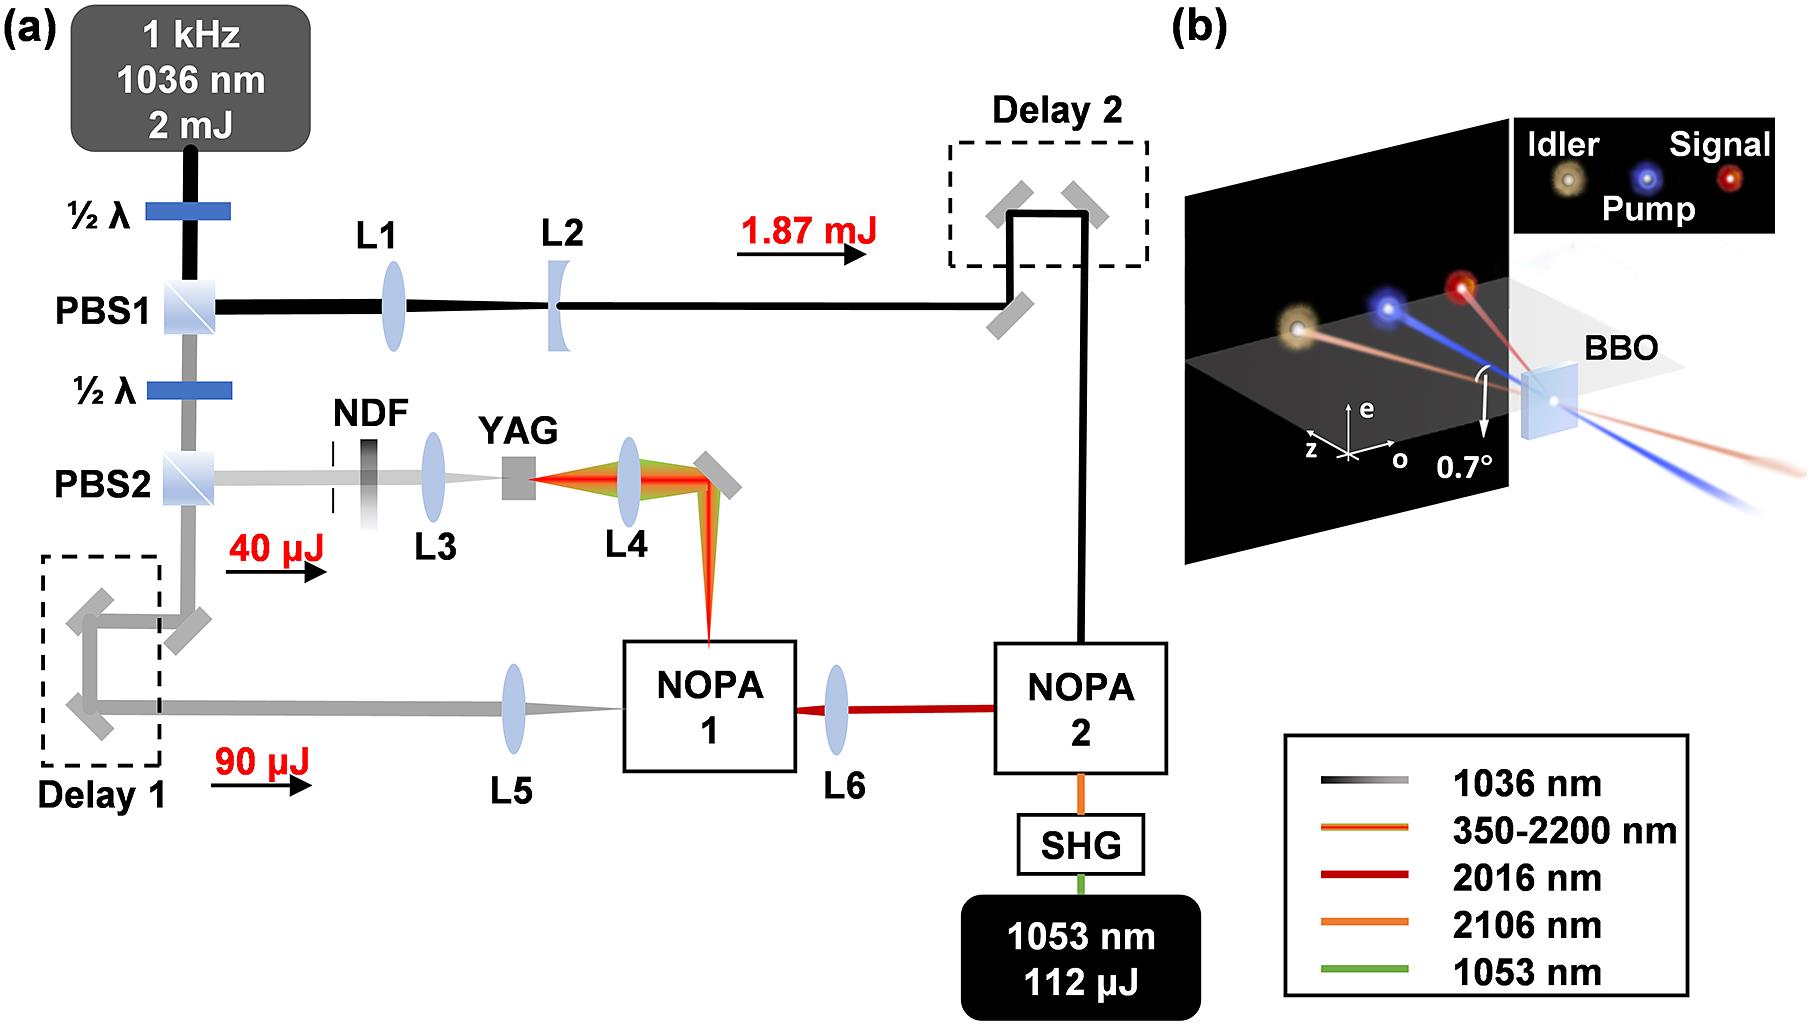 (a) Scheme of the 1053 nm laser source. PBS: polarization beam splitter; L: lens; NDF: neutral density filter; NOPA: noncollinear OPA. The linewidth indicates the beam size roughly and the shade indicates the pulse energy. (b) Schematic of the NOPA, where the angle between the signal and the pump is less than 0.7°.